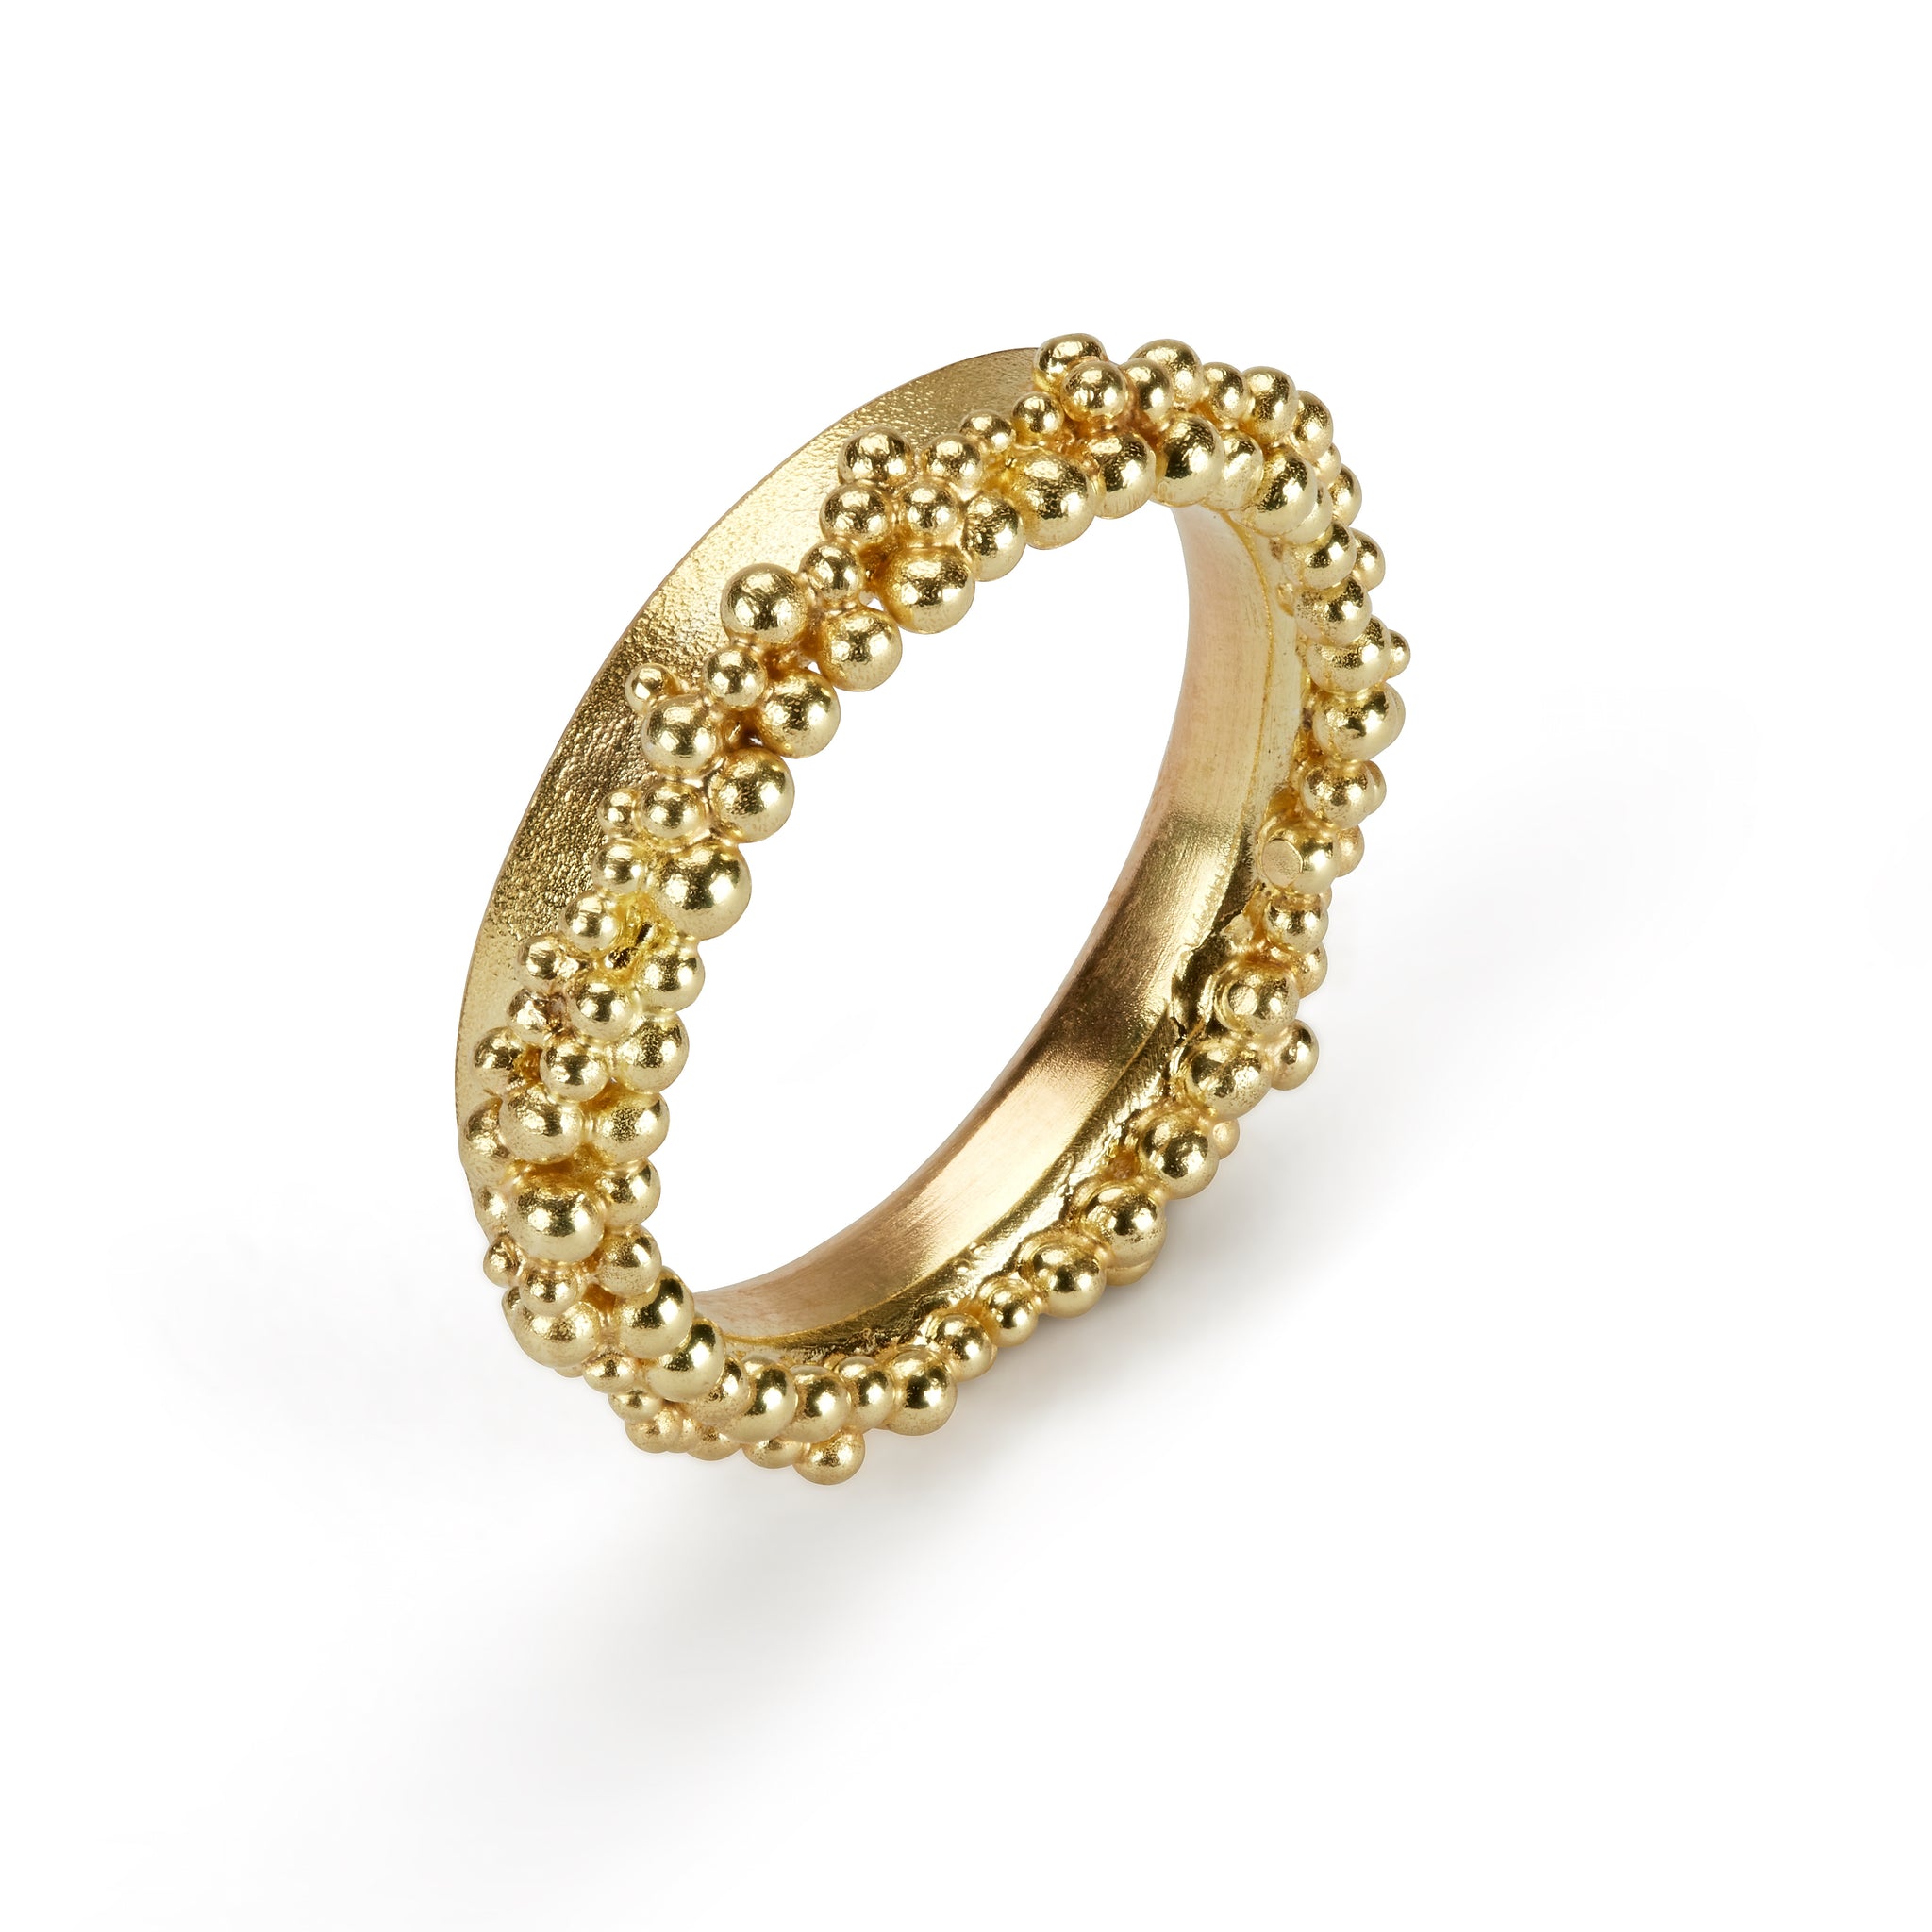 Golden Froth Ring